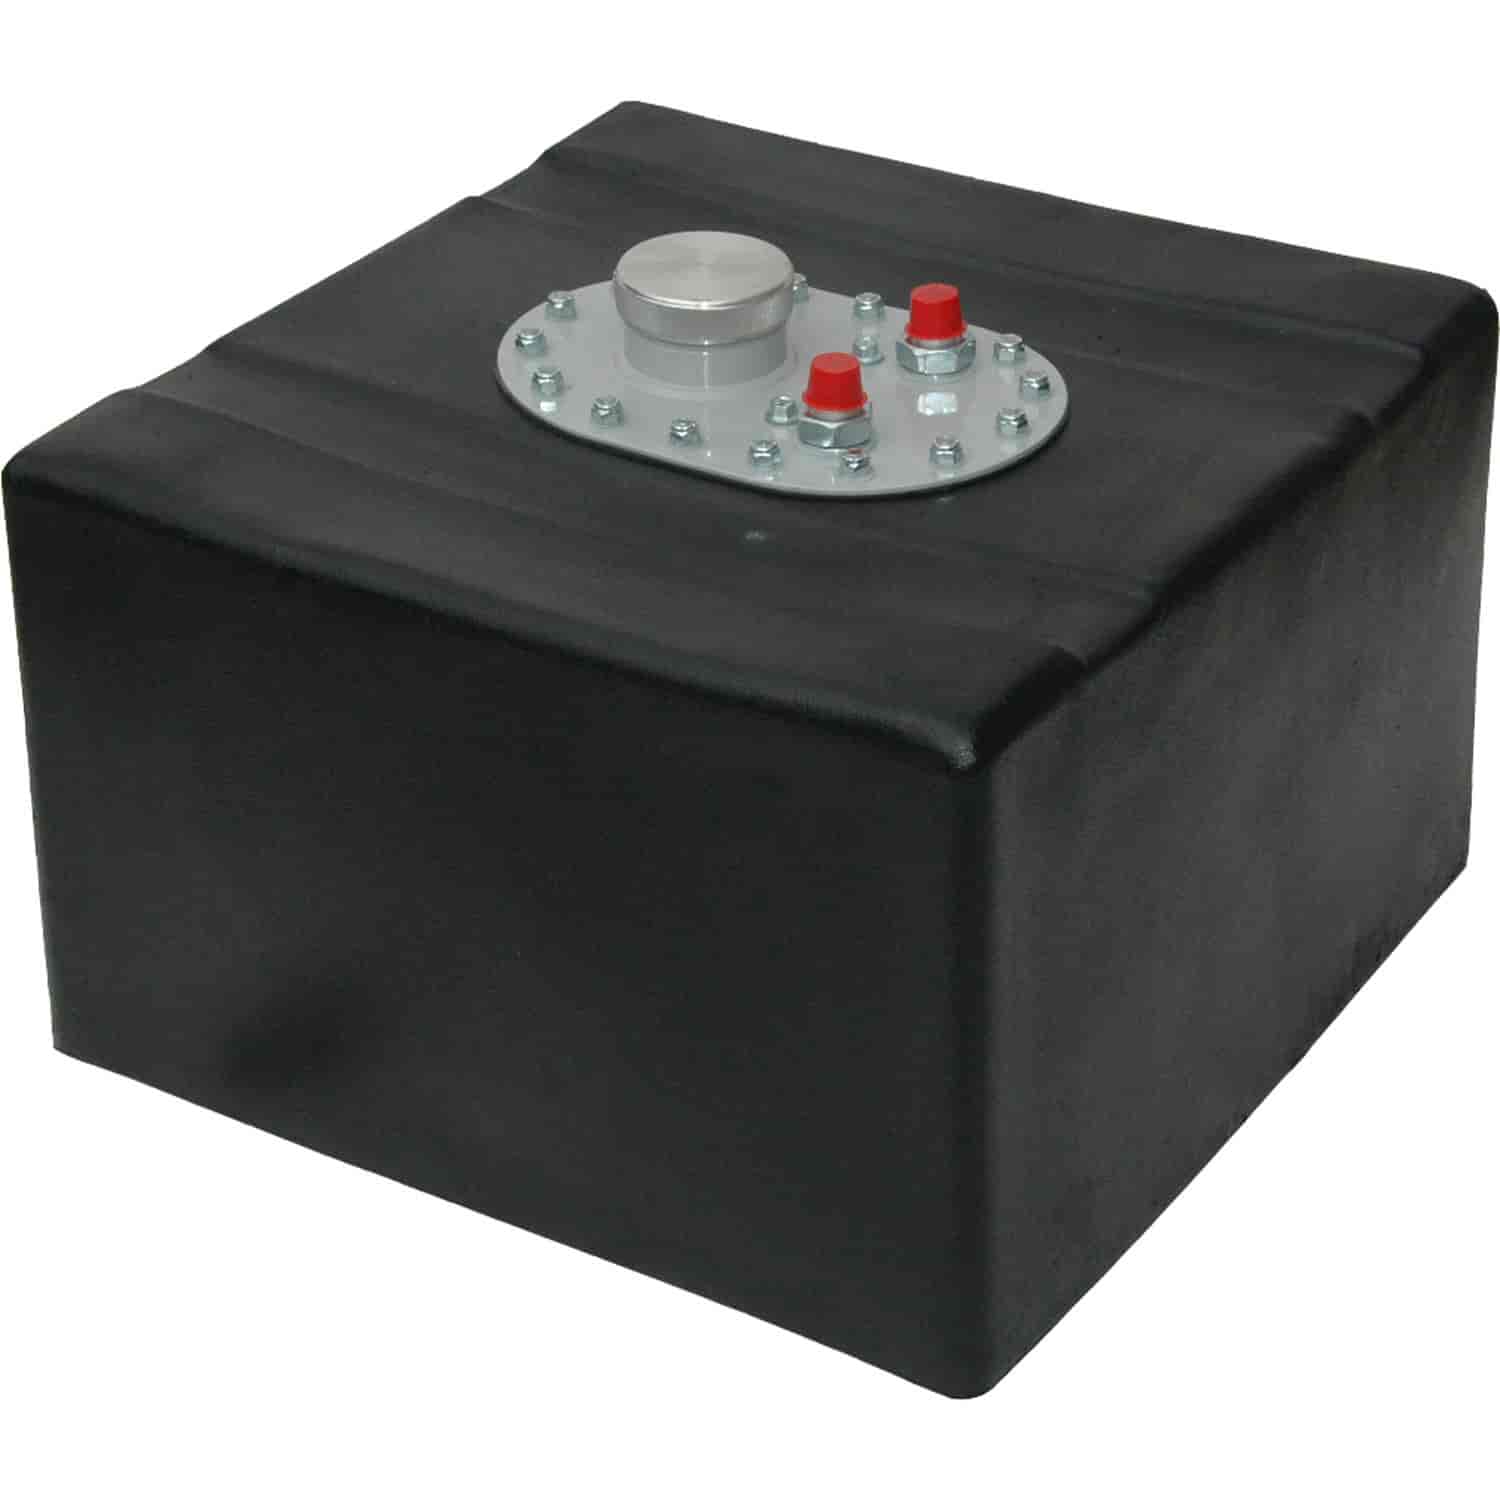 Black Circle Track Fuel Cell Capacity: 12 gallons